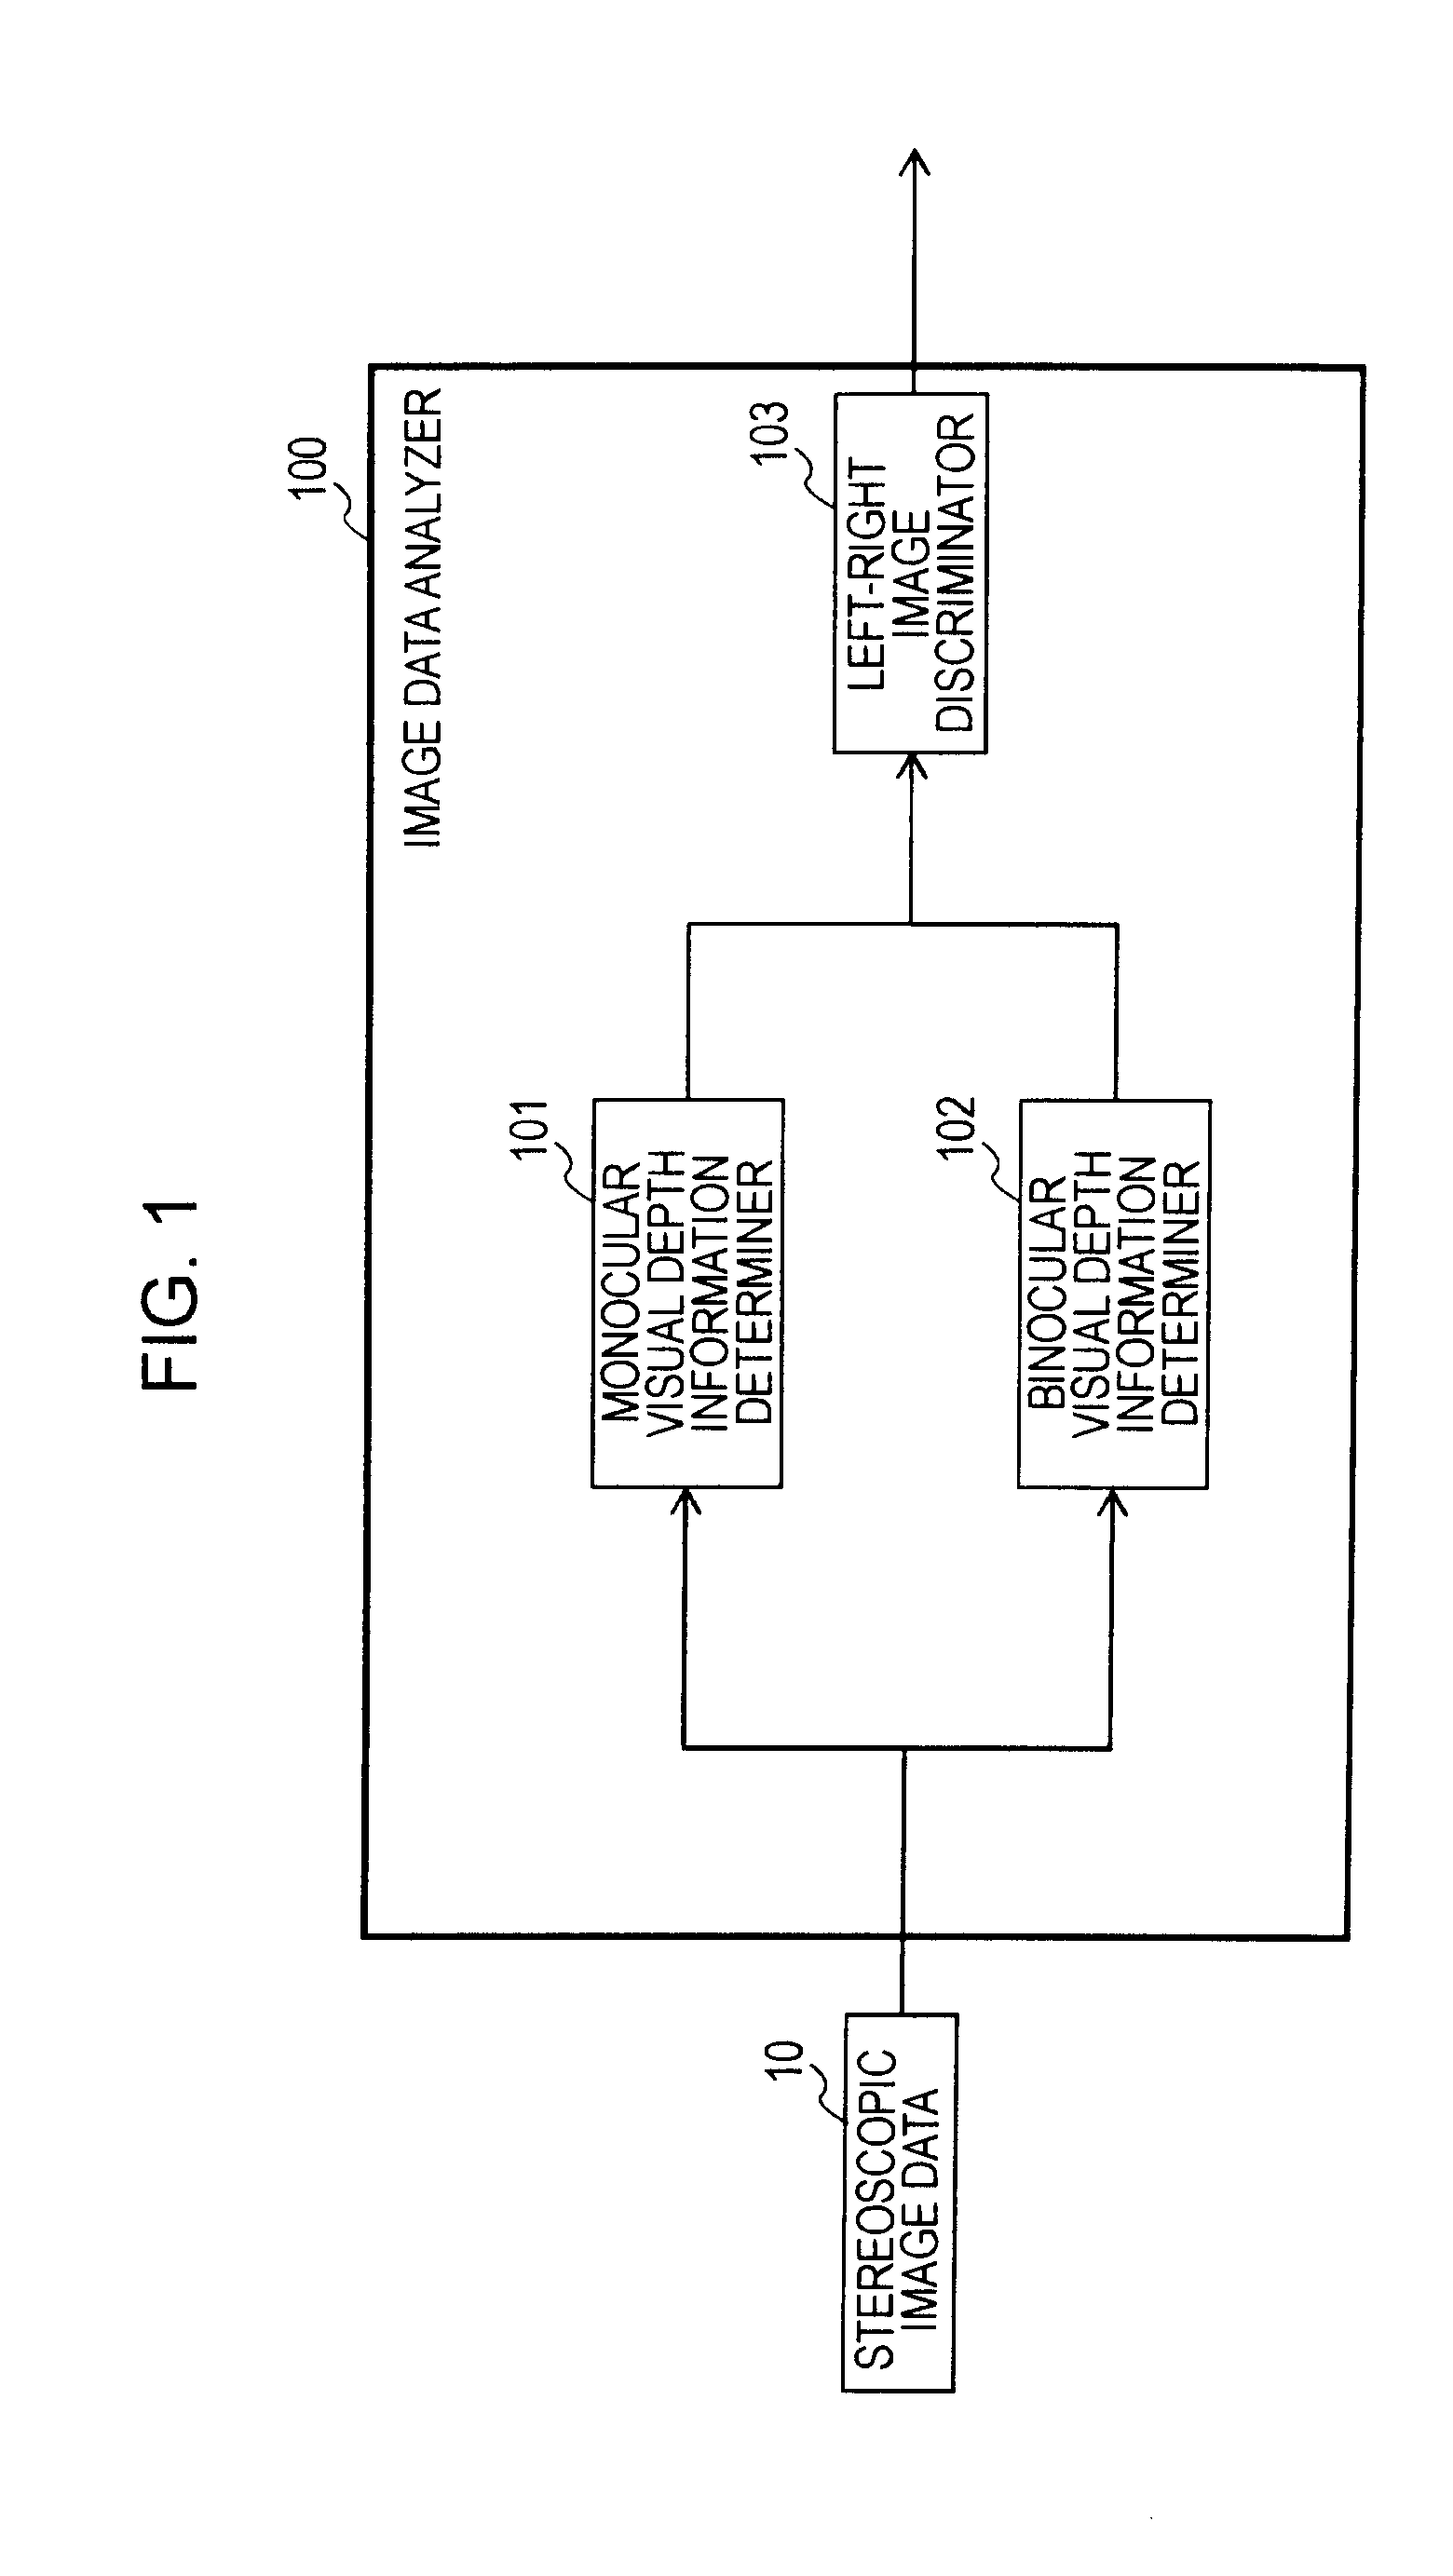 Apparatus, method, and computer program for analyzing image data